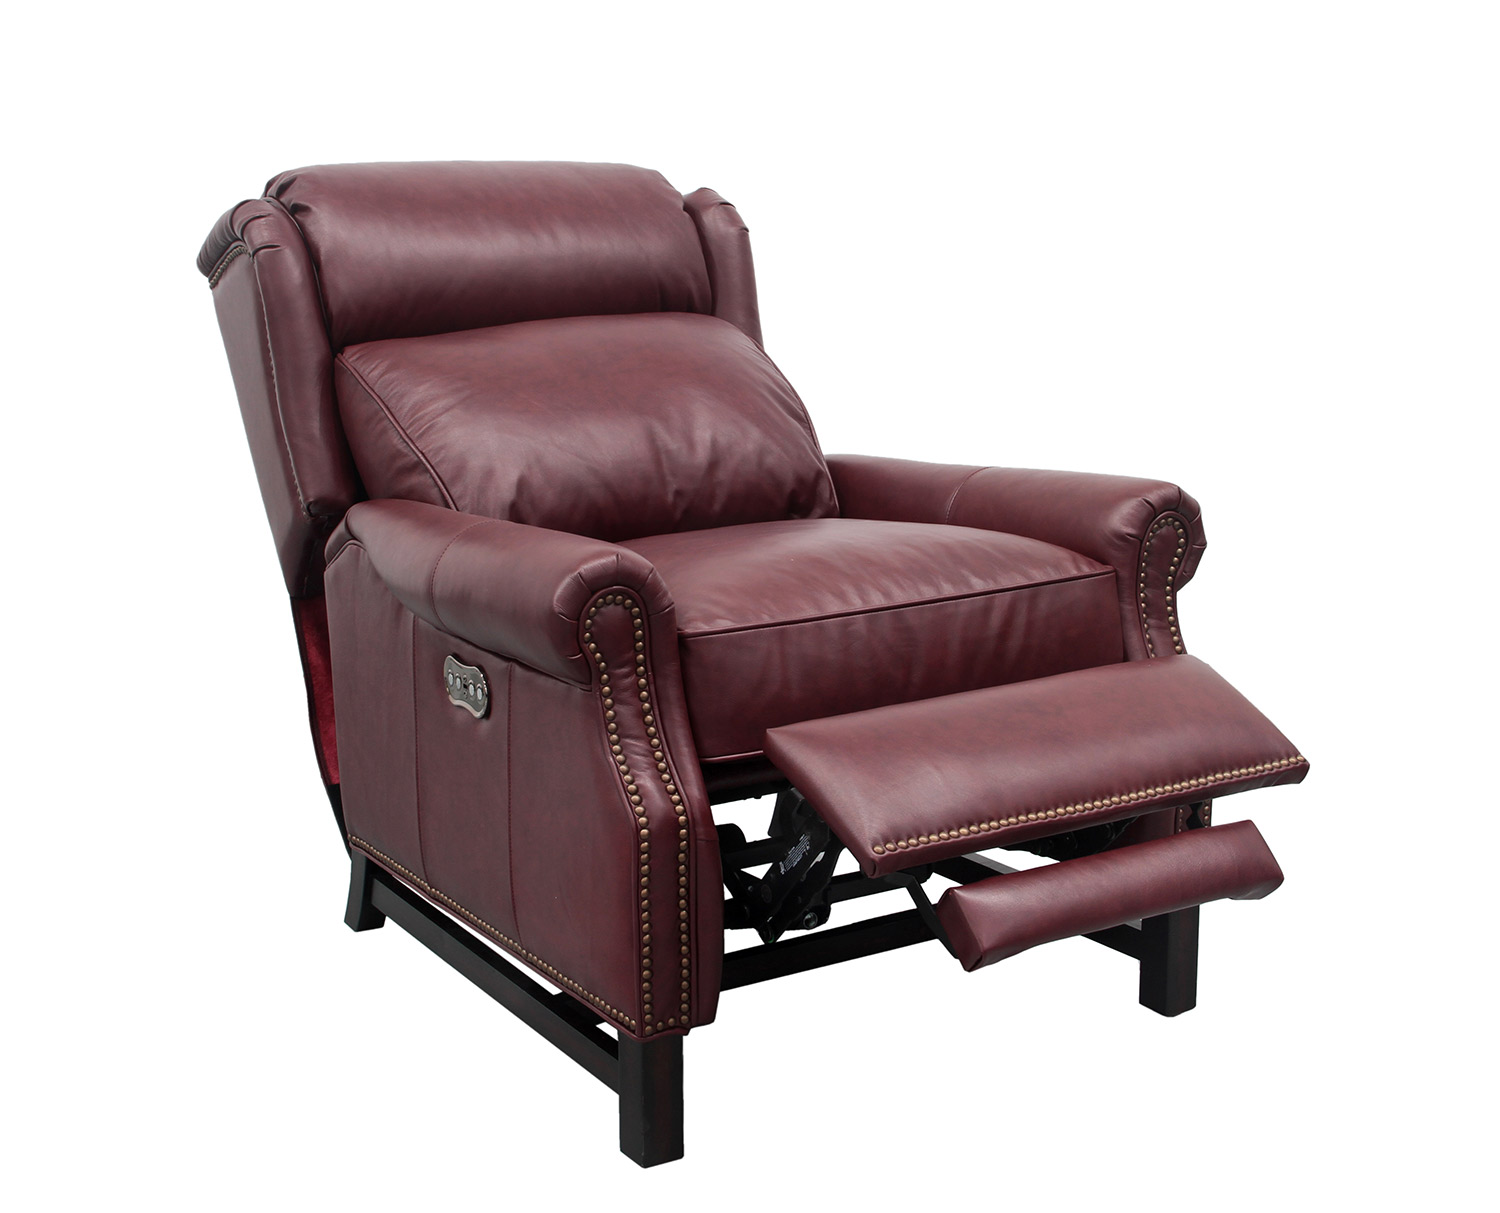 Barcalounger Thornfield Power Recliner Chair with Power Head Rest - Shoreham Wine/All Leather